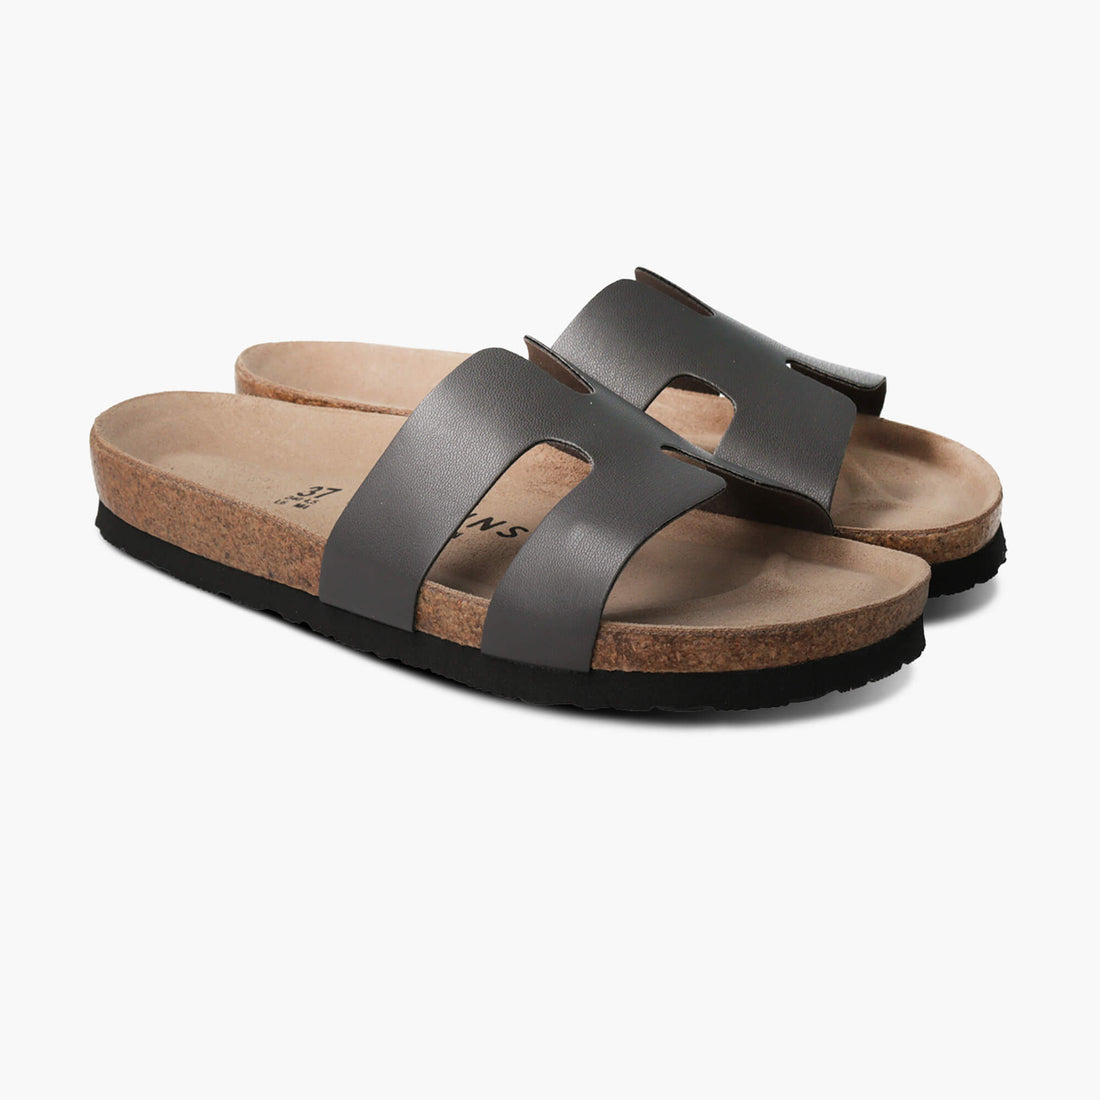 Hilary Anthracite Sandals